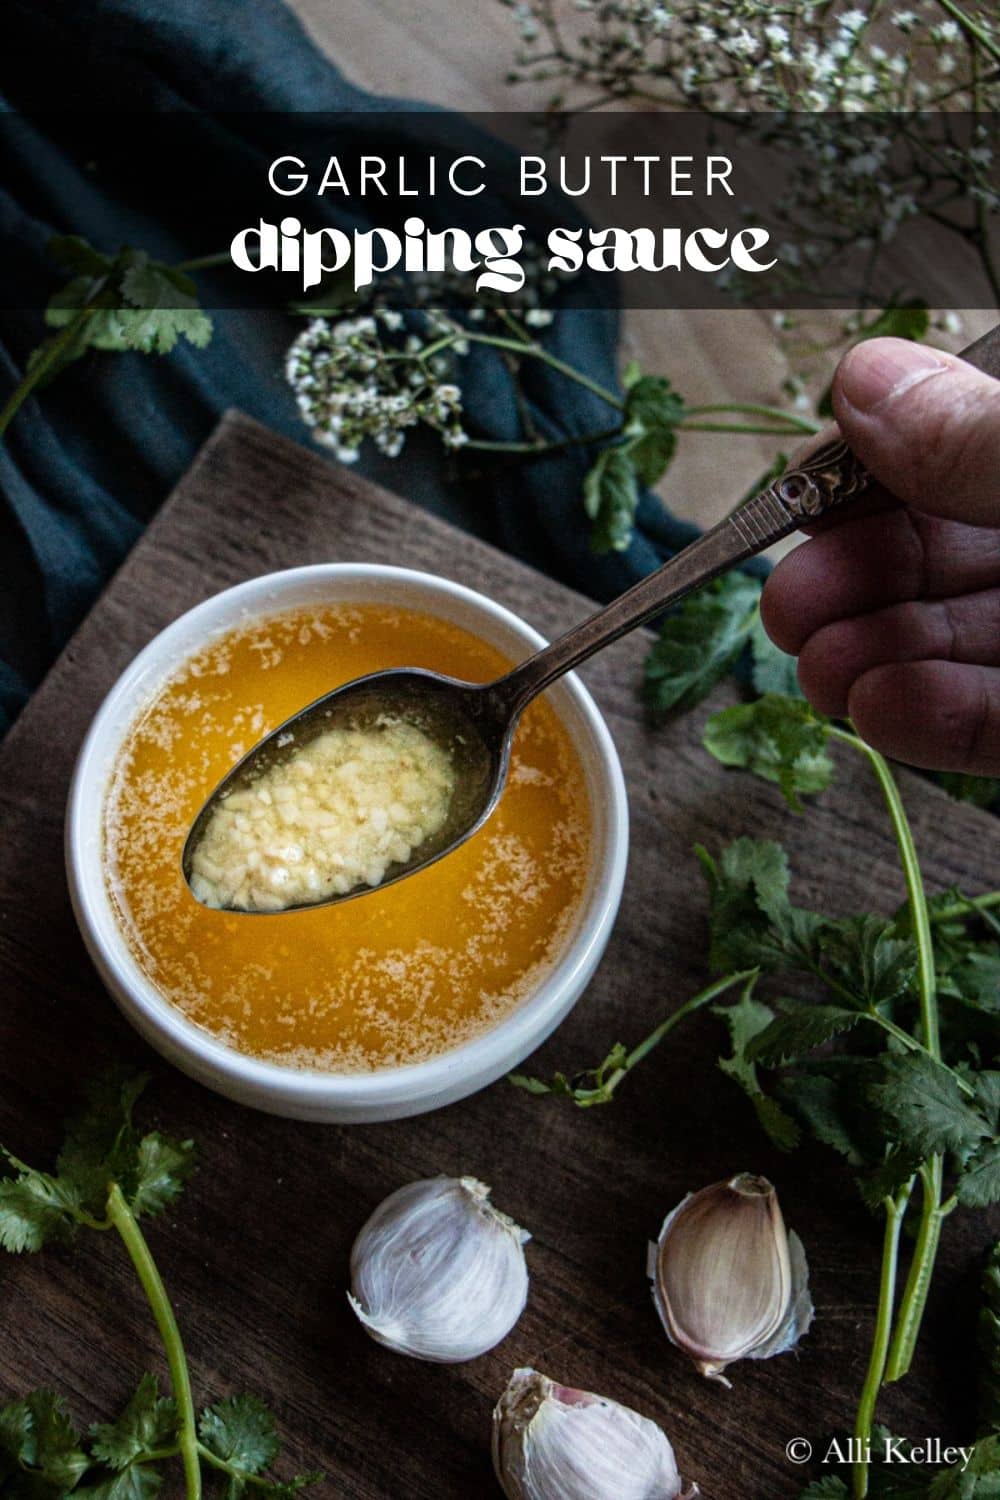 With just a few simple ingredients, you can whip up an incredibly tasty garlic dipping sauce in no time! This vibrant and versatile condiment will seriously make your meals come to life! My garlic butter dipping sauce perfectly complements various dishes, from crispy oven-baked chicken wings to freshly-made pizza.